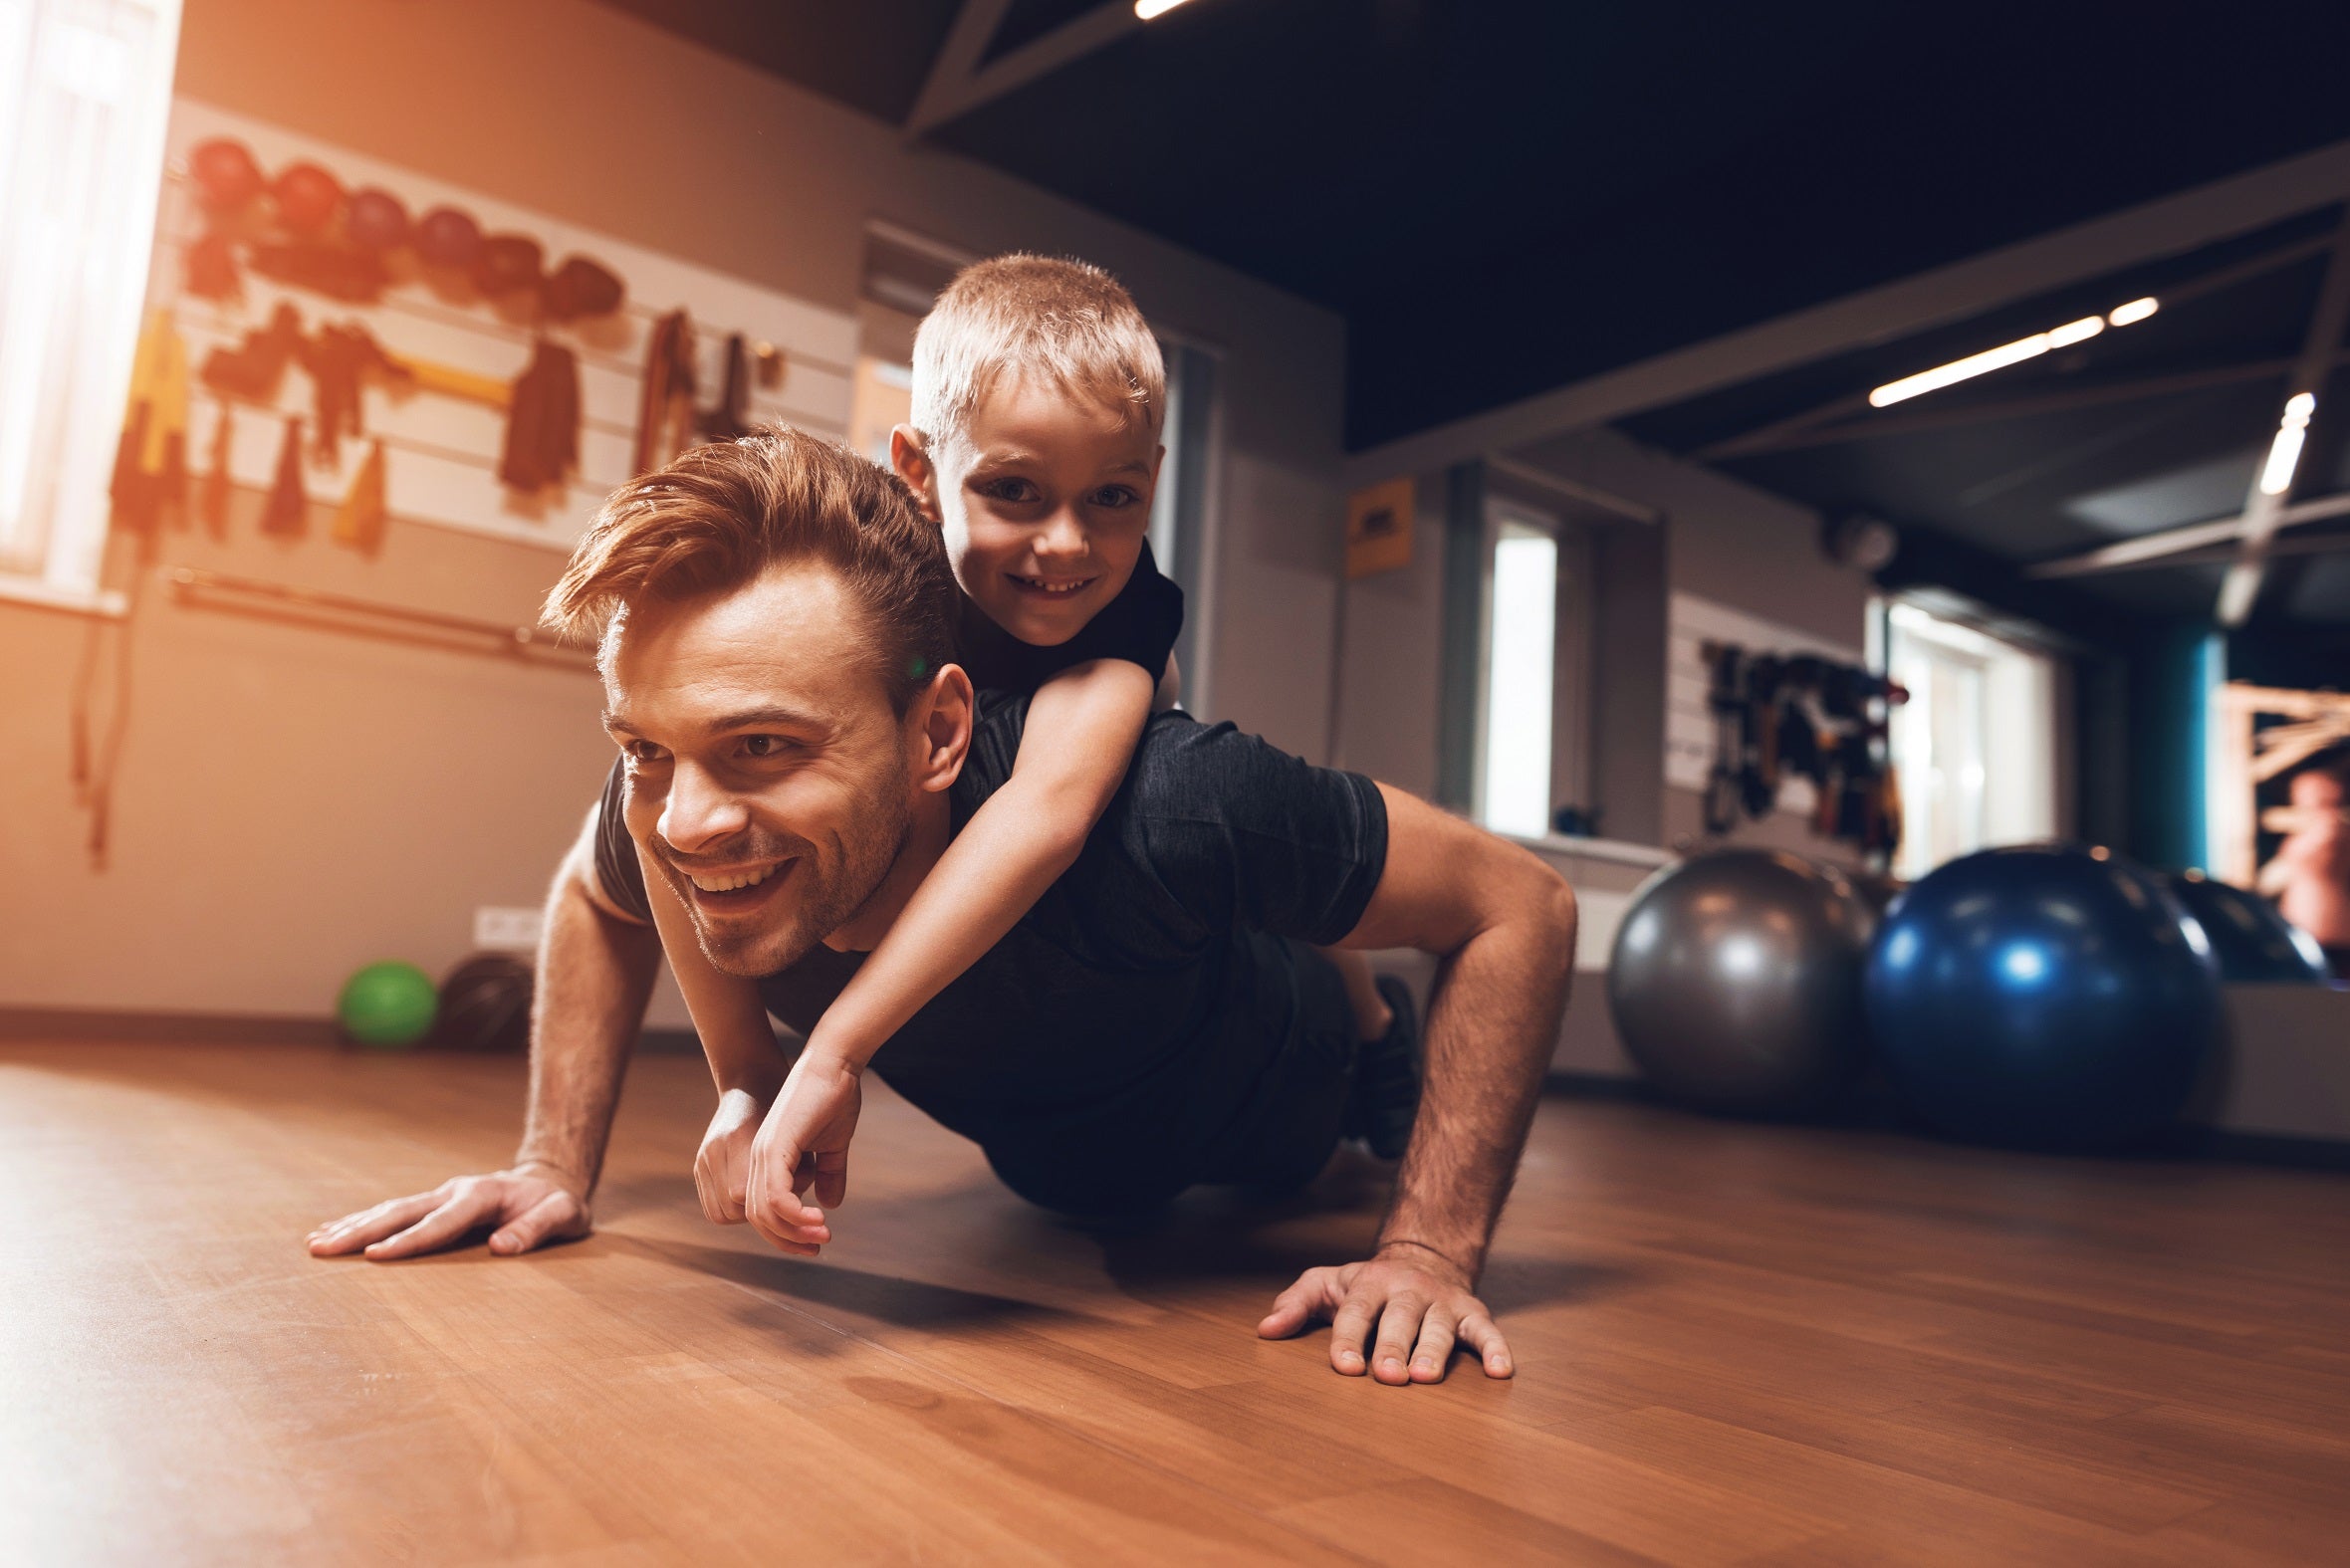 15 Father's Day Gifts for the Fitness and Wellness-Loving Dad